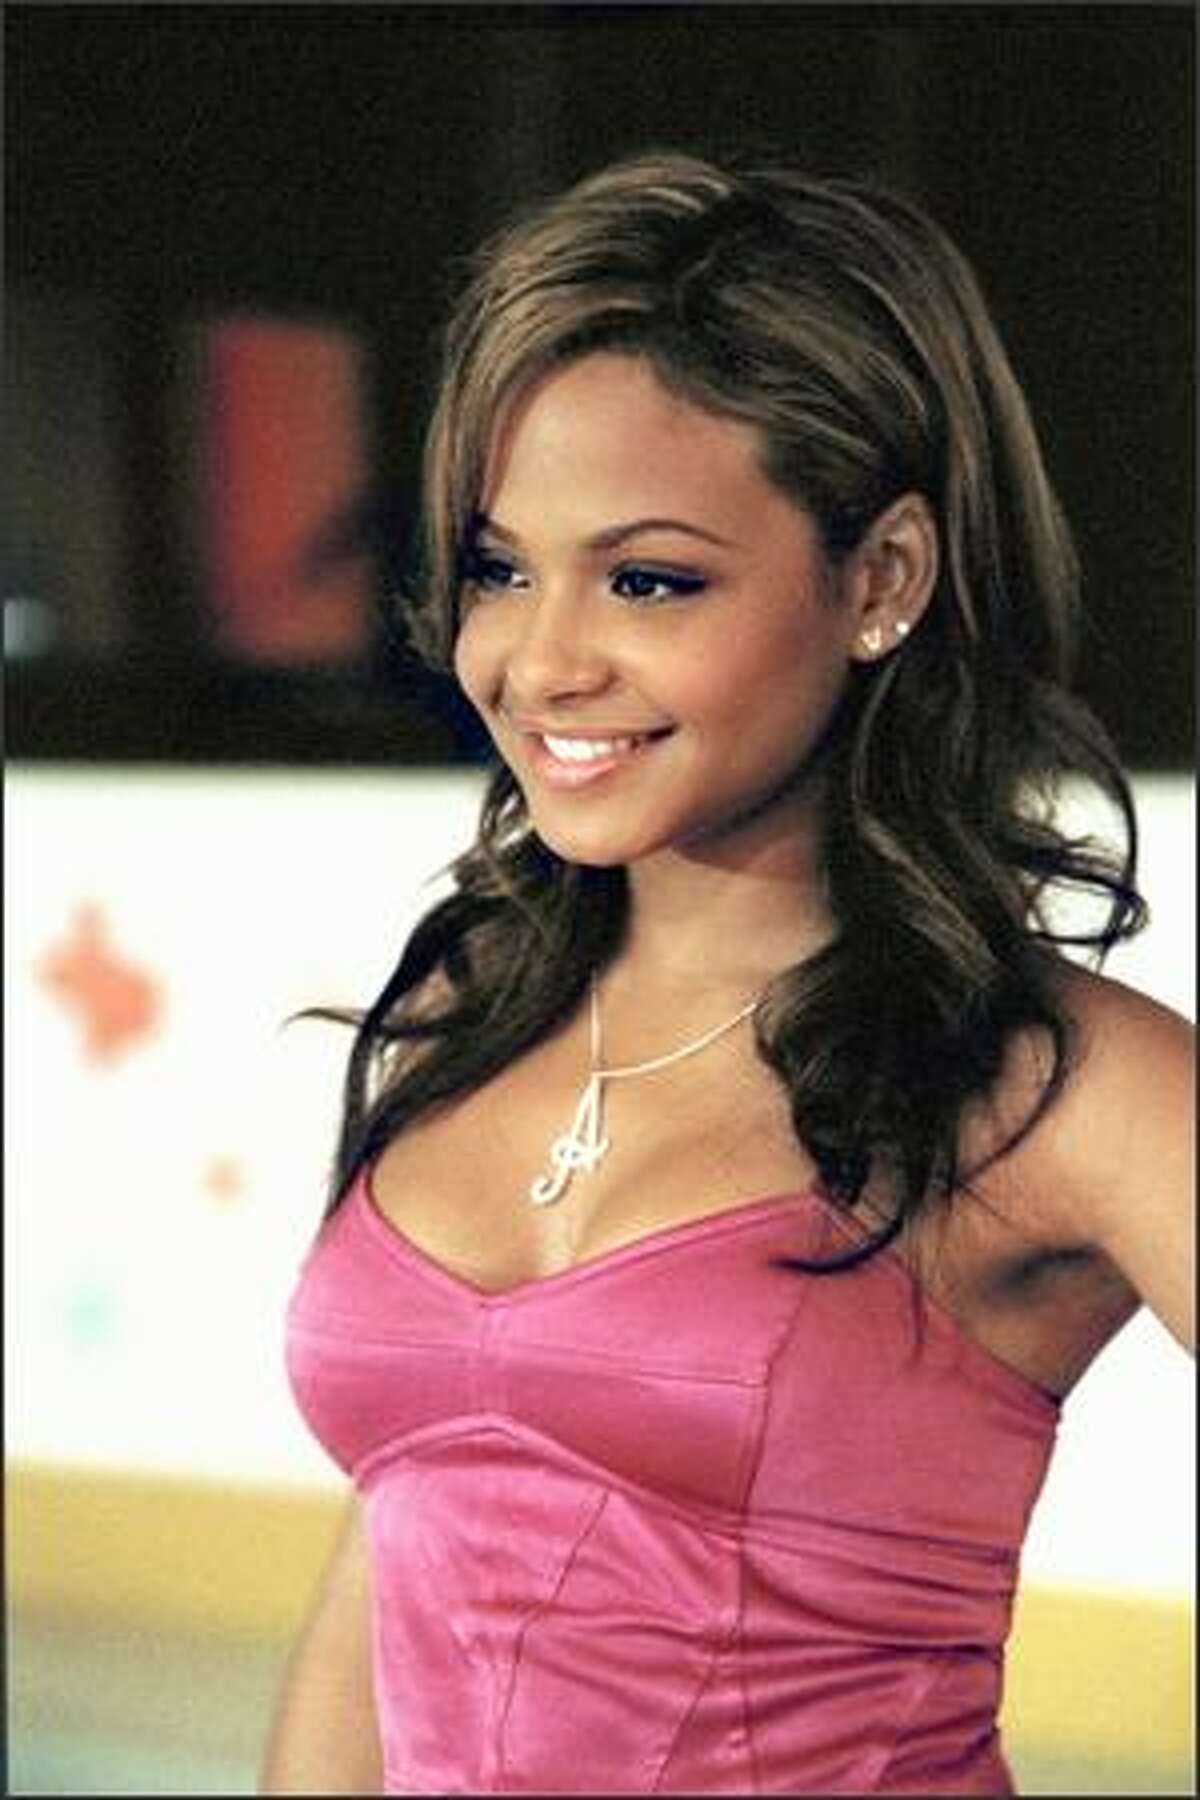 Christina Milian plays cheerleading captain Anne. Milian, of Cuban-American heritage, has guest-starred on such TV sitcoms as "The Steve Harvey Show," and earned small roles in such films as "The Wood" and "American Pie." She is also an accomplished recording artist.